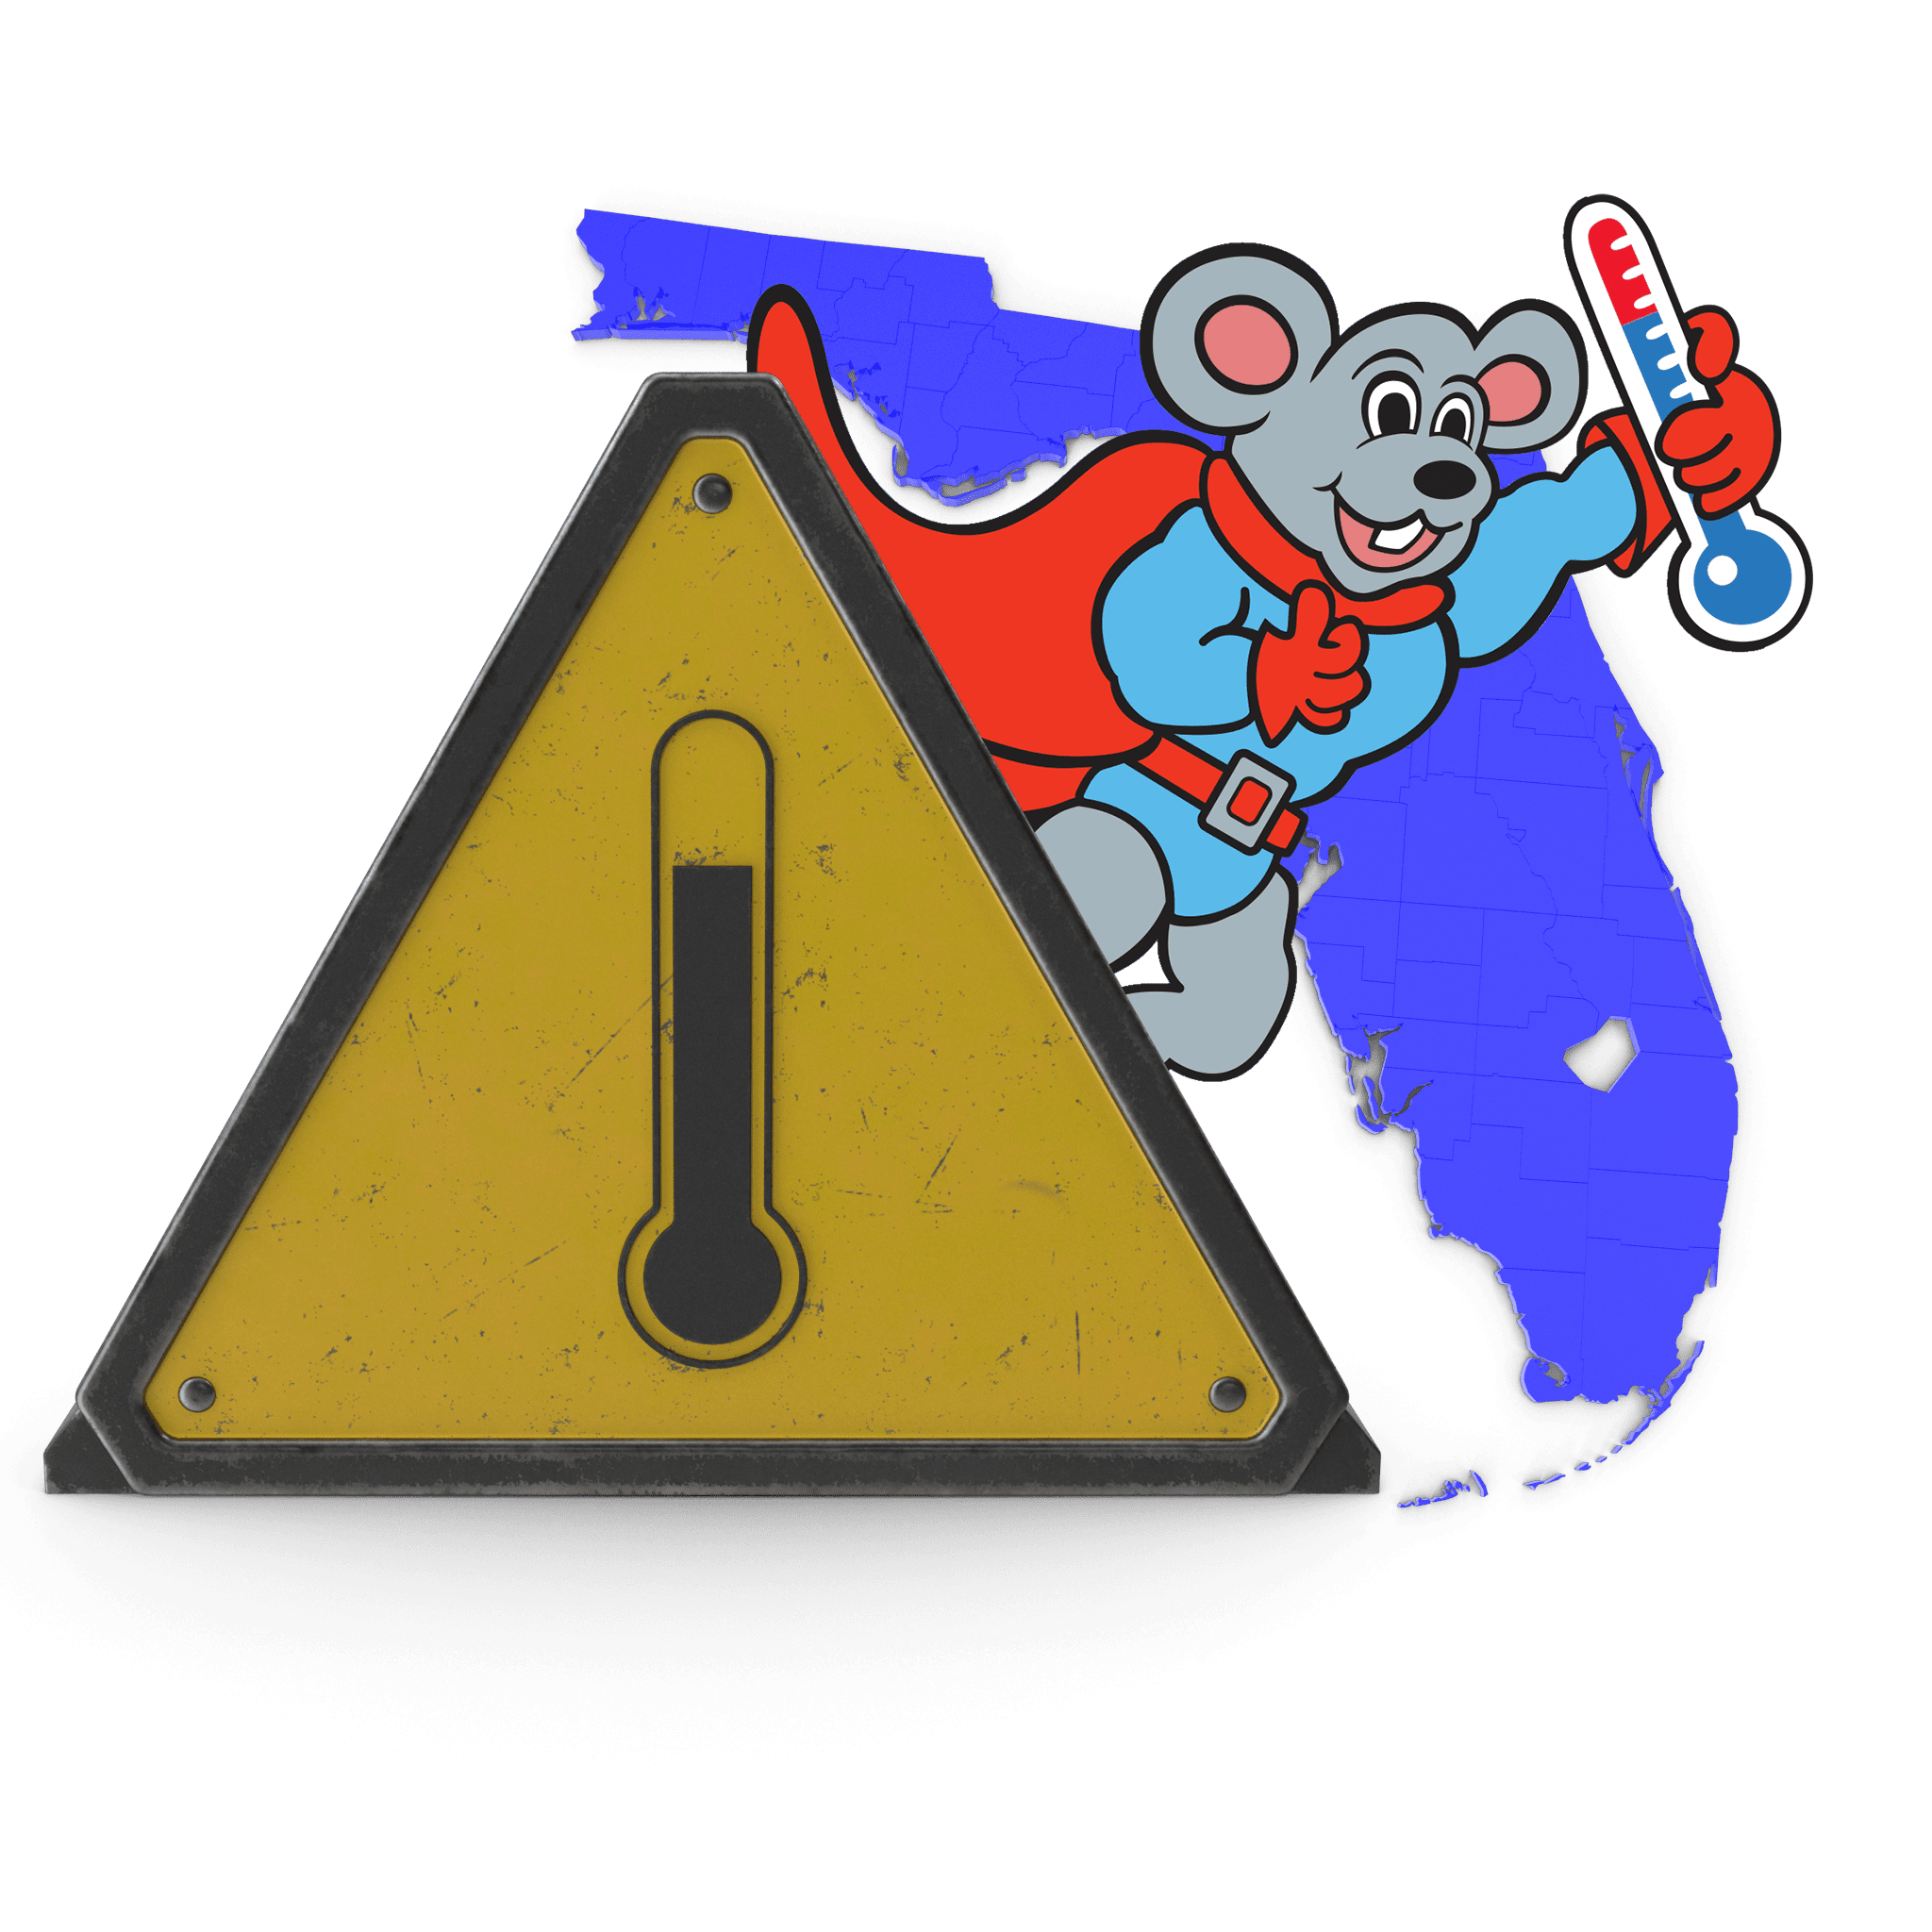 Florida air express installing air conditioning systems in Lake Wales, FL